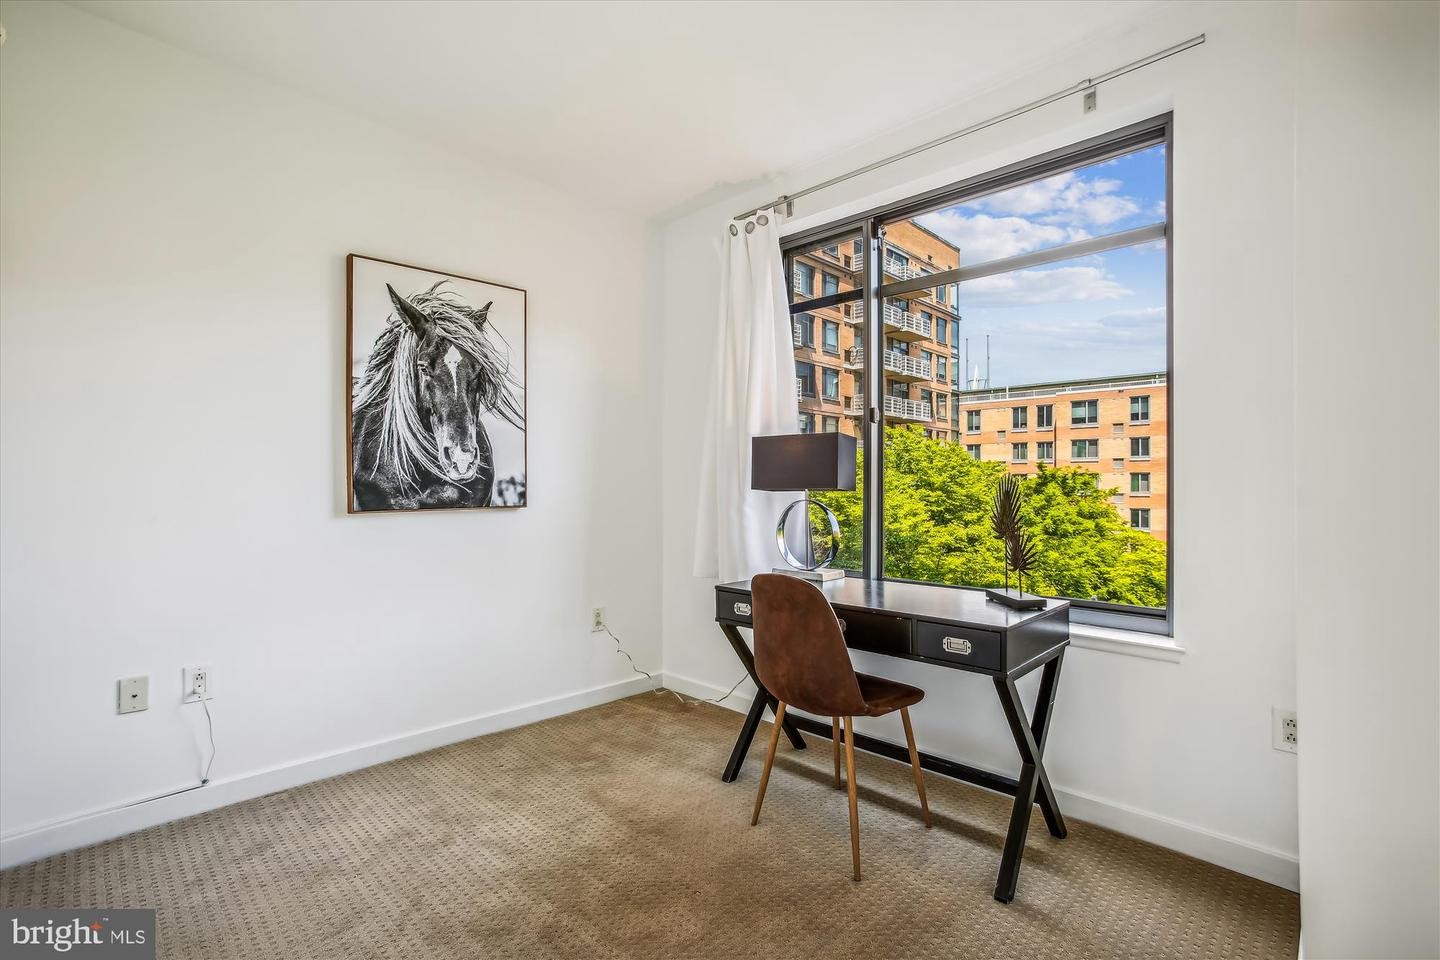 21. 475 K St NW 